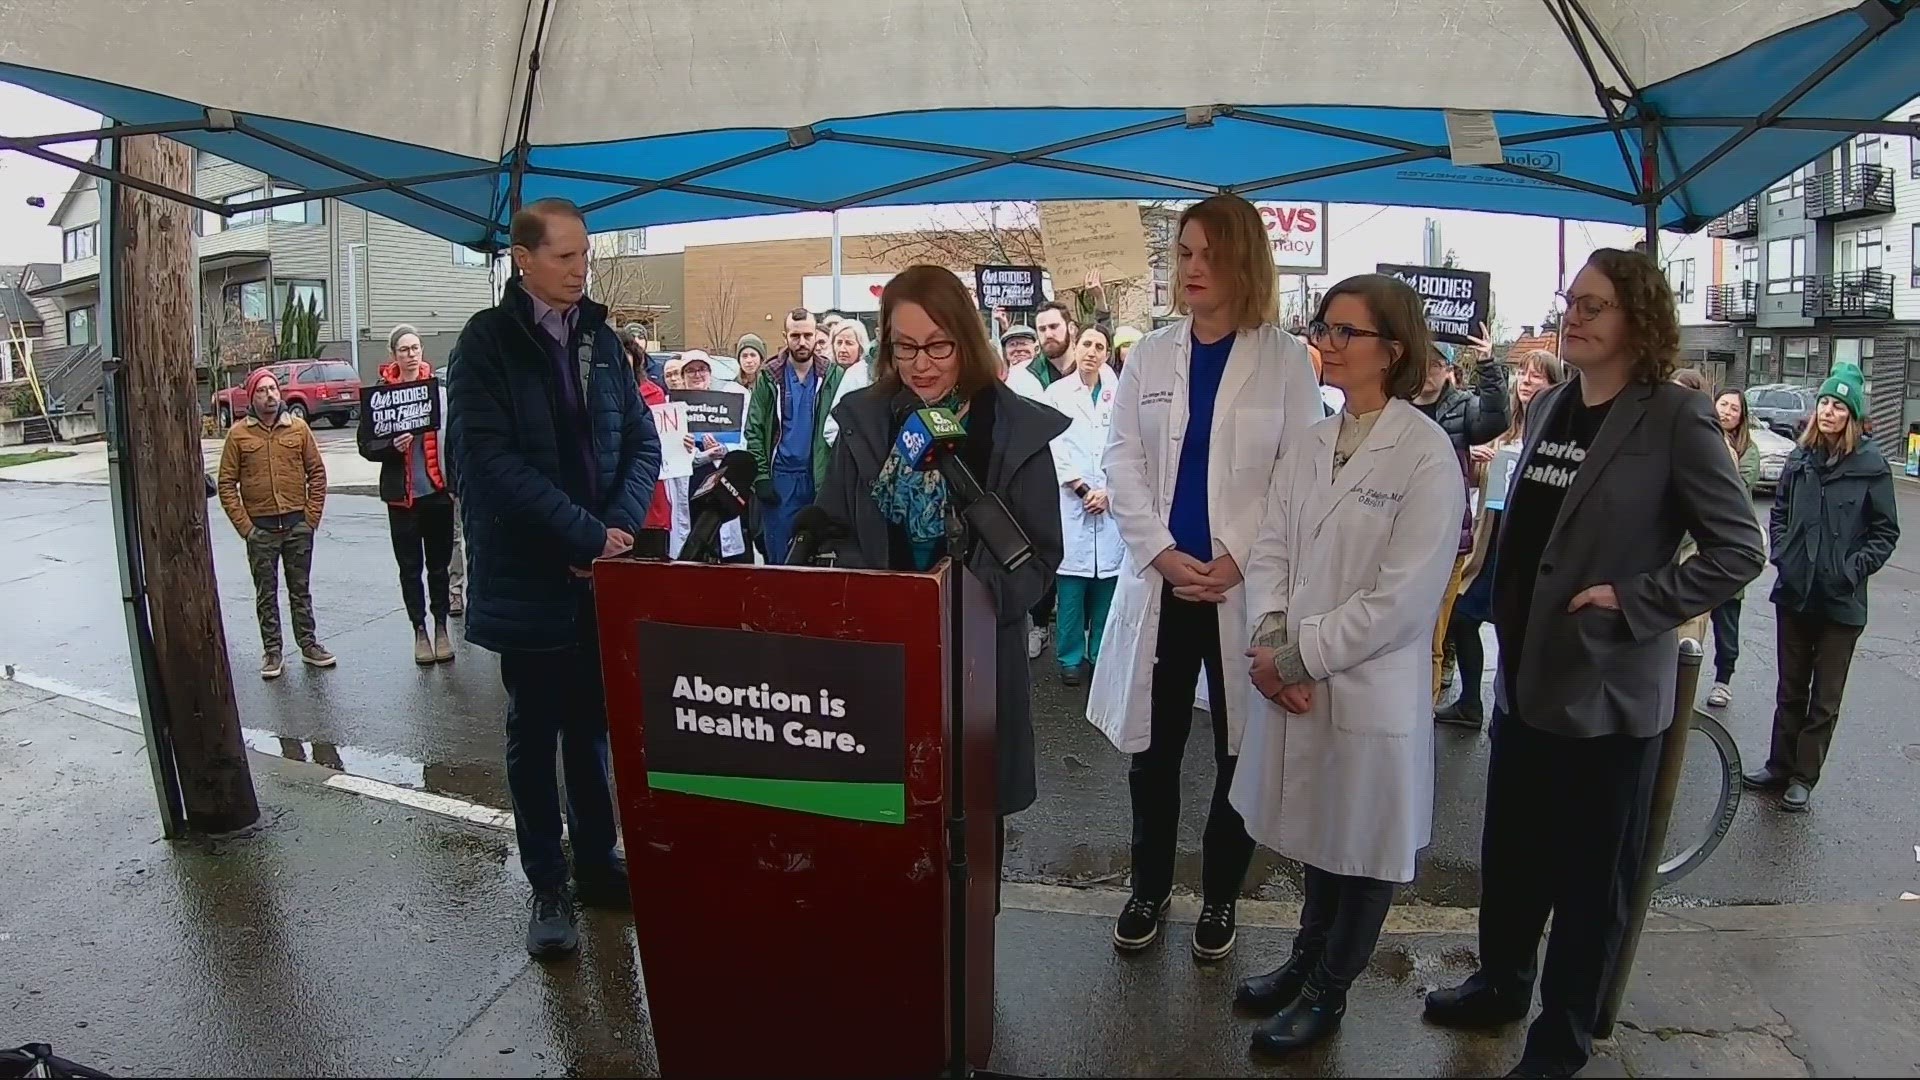 Senator Ron Wyden and Attorney General Ellen Rosenblum spoke out against against a federal lawsuit that aims to end the distribution of mifepristone